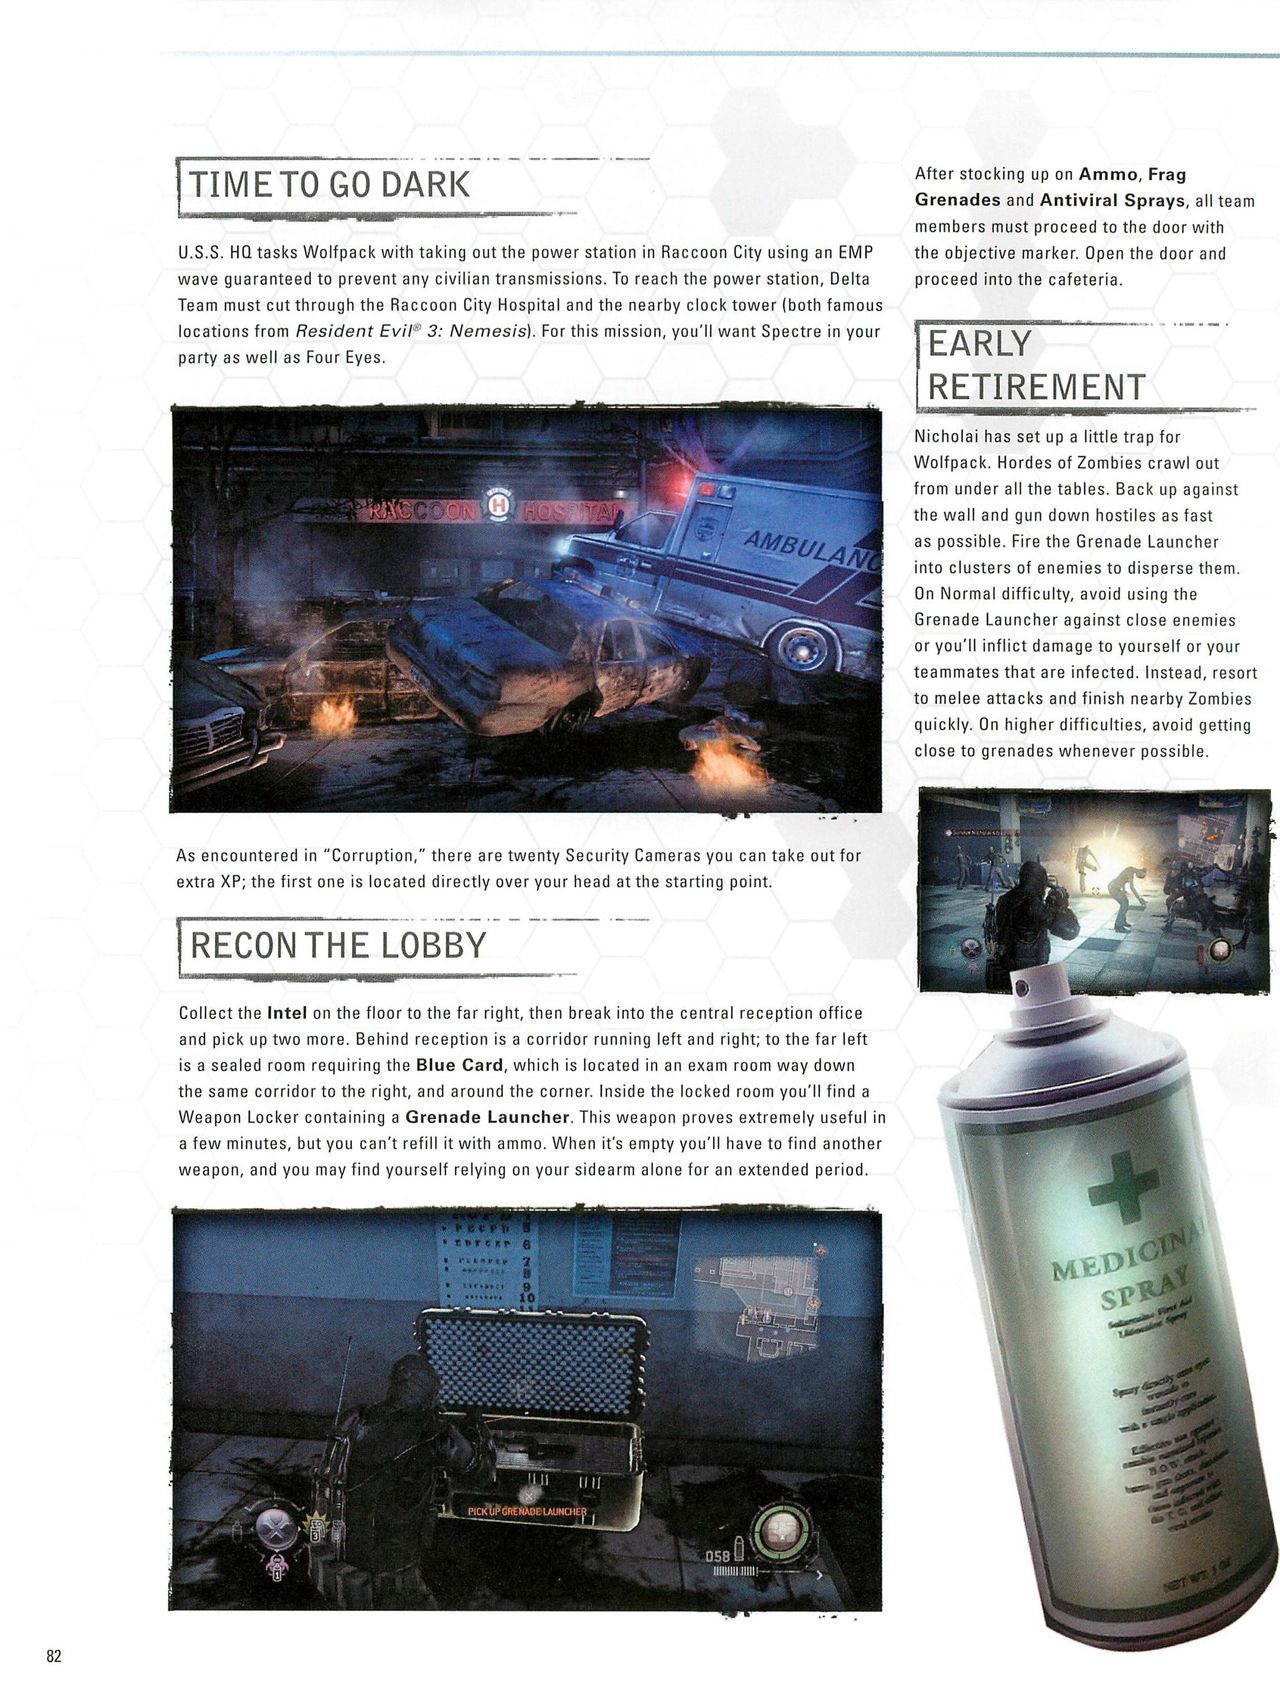 Resident Evil: Operation Raccoon City Official Strategy Guide (watermarked) 84